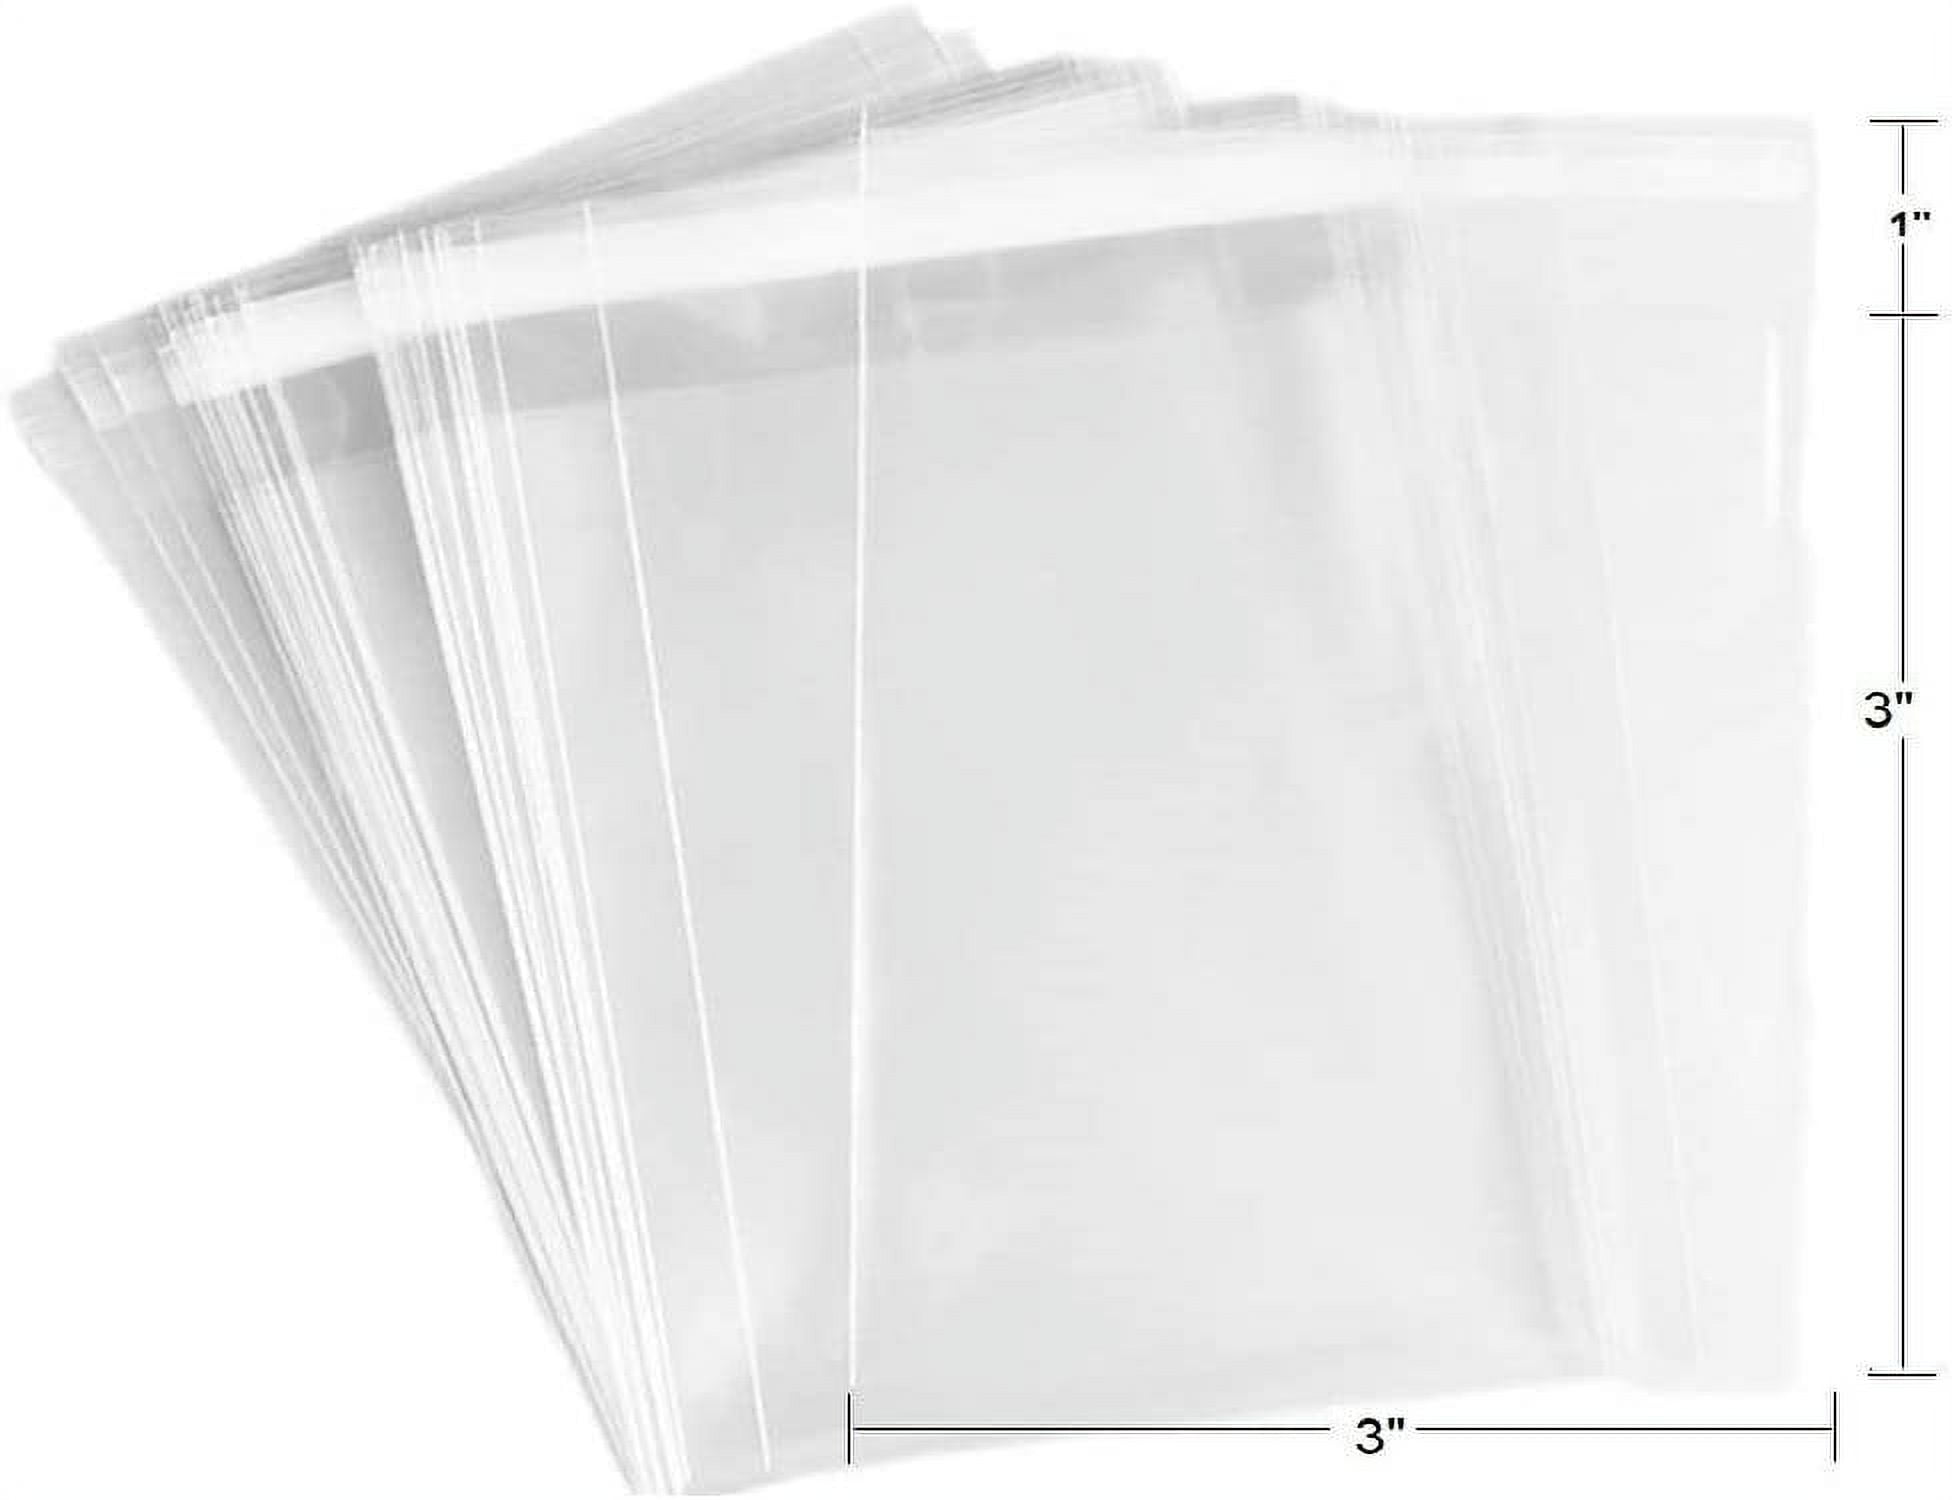 100 Cello Bags: 2.75 x 3.75 inch (Trading Card Size), Resealable 2